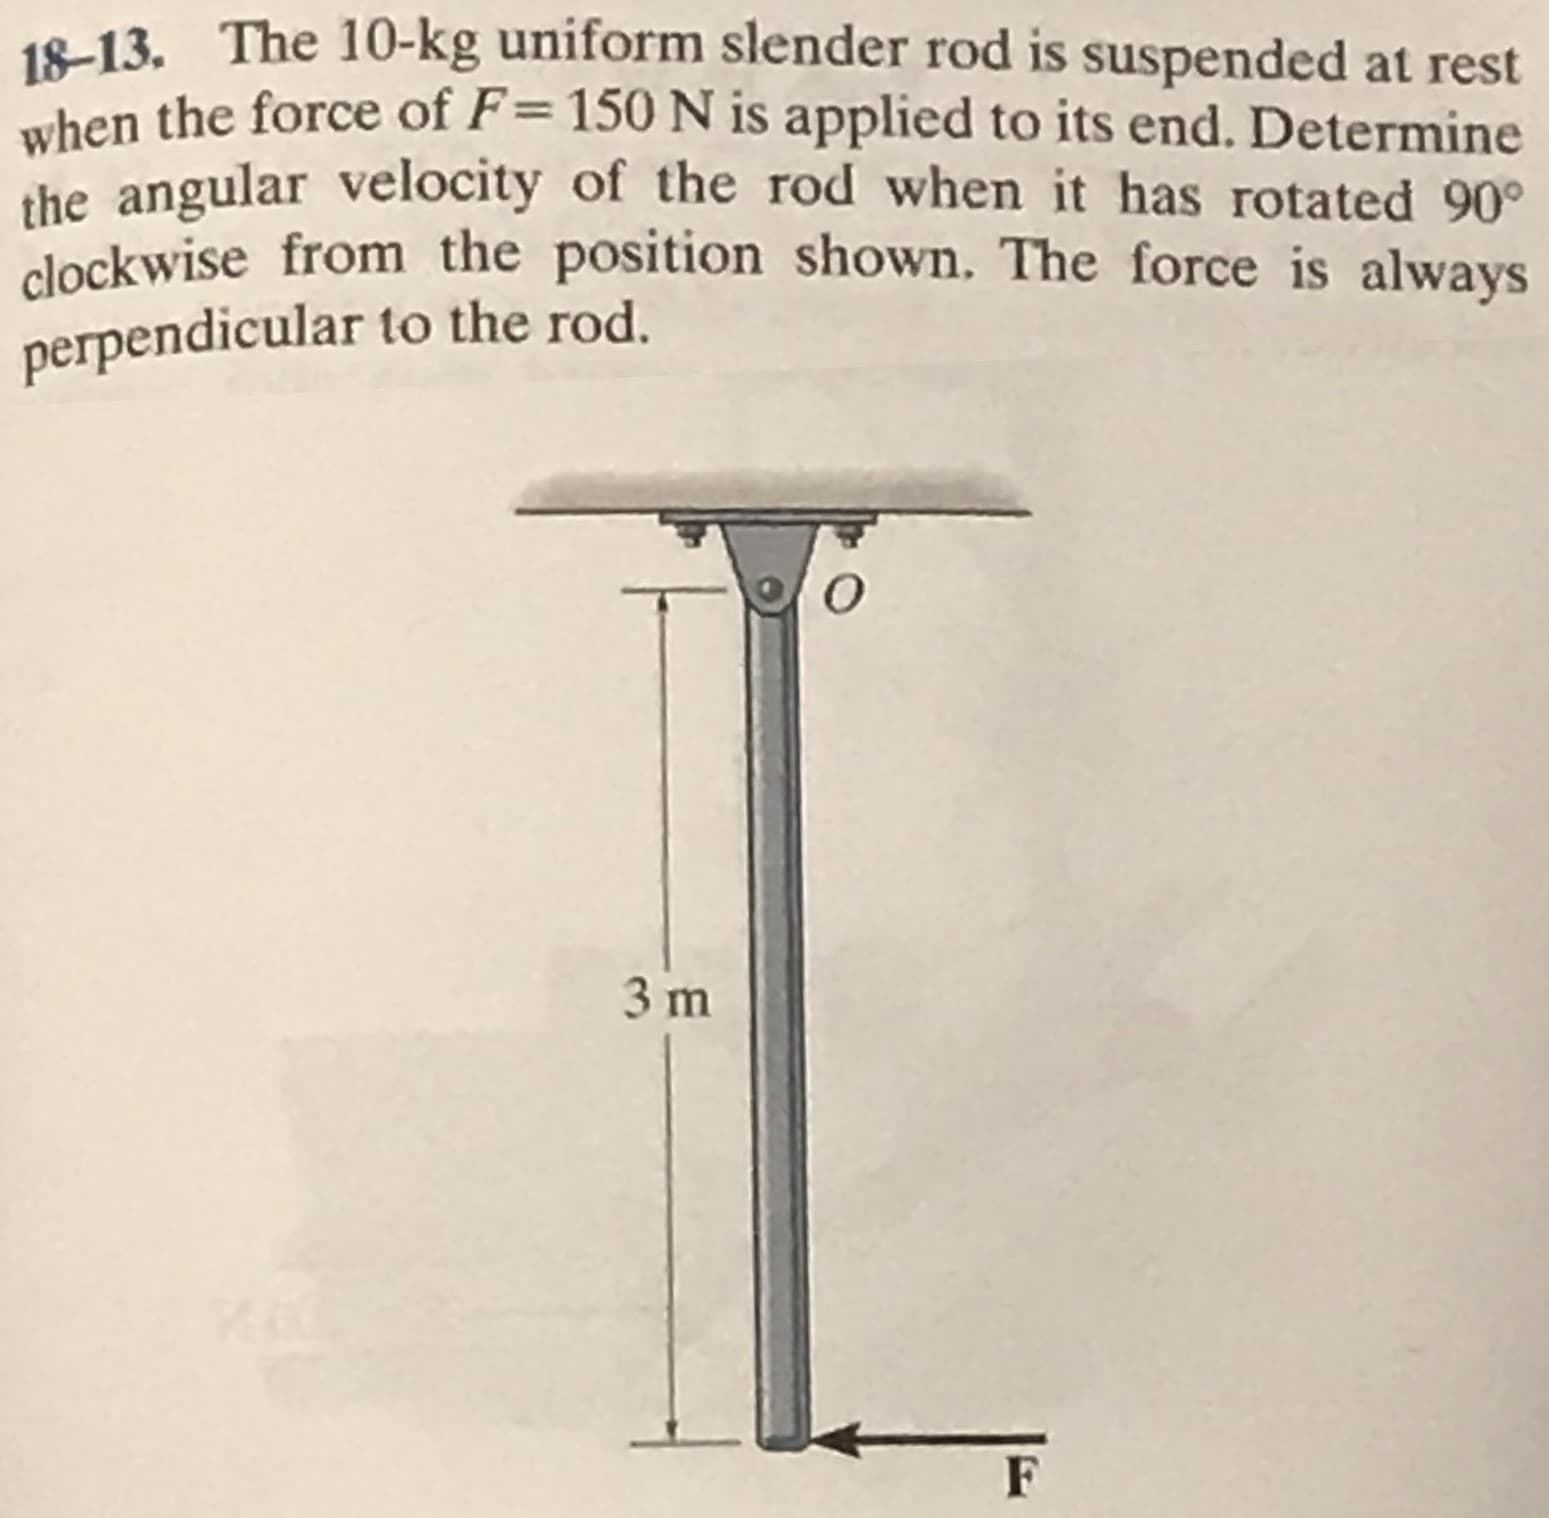 18-13. The 10-kg uniform slender rod is suspended at rest
when the force of F= 150 N is applied to its end. Determine
the angular velocity of the rod when it has rotated 90°
clockwise from the position shown. The force is always
perpendicular to the rod.
%3D
3 m
